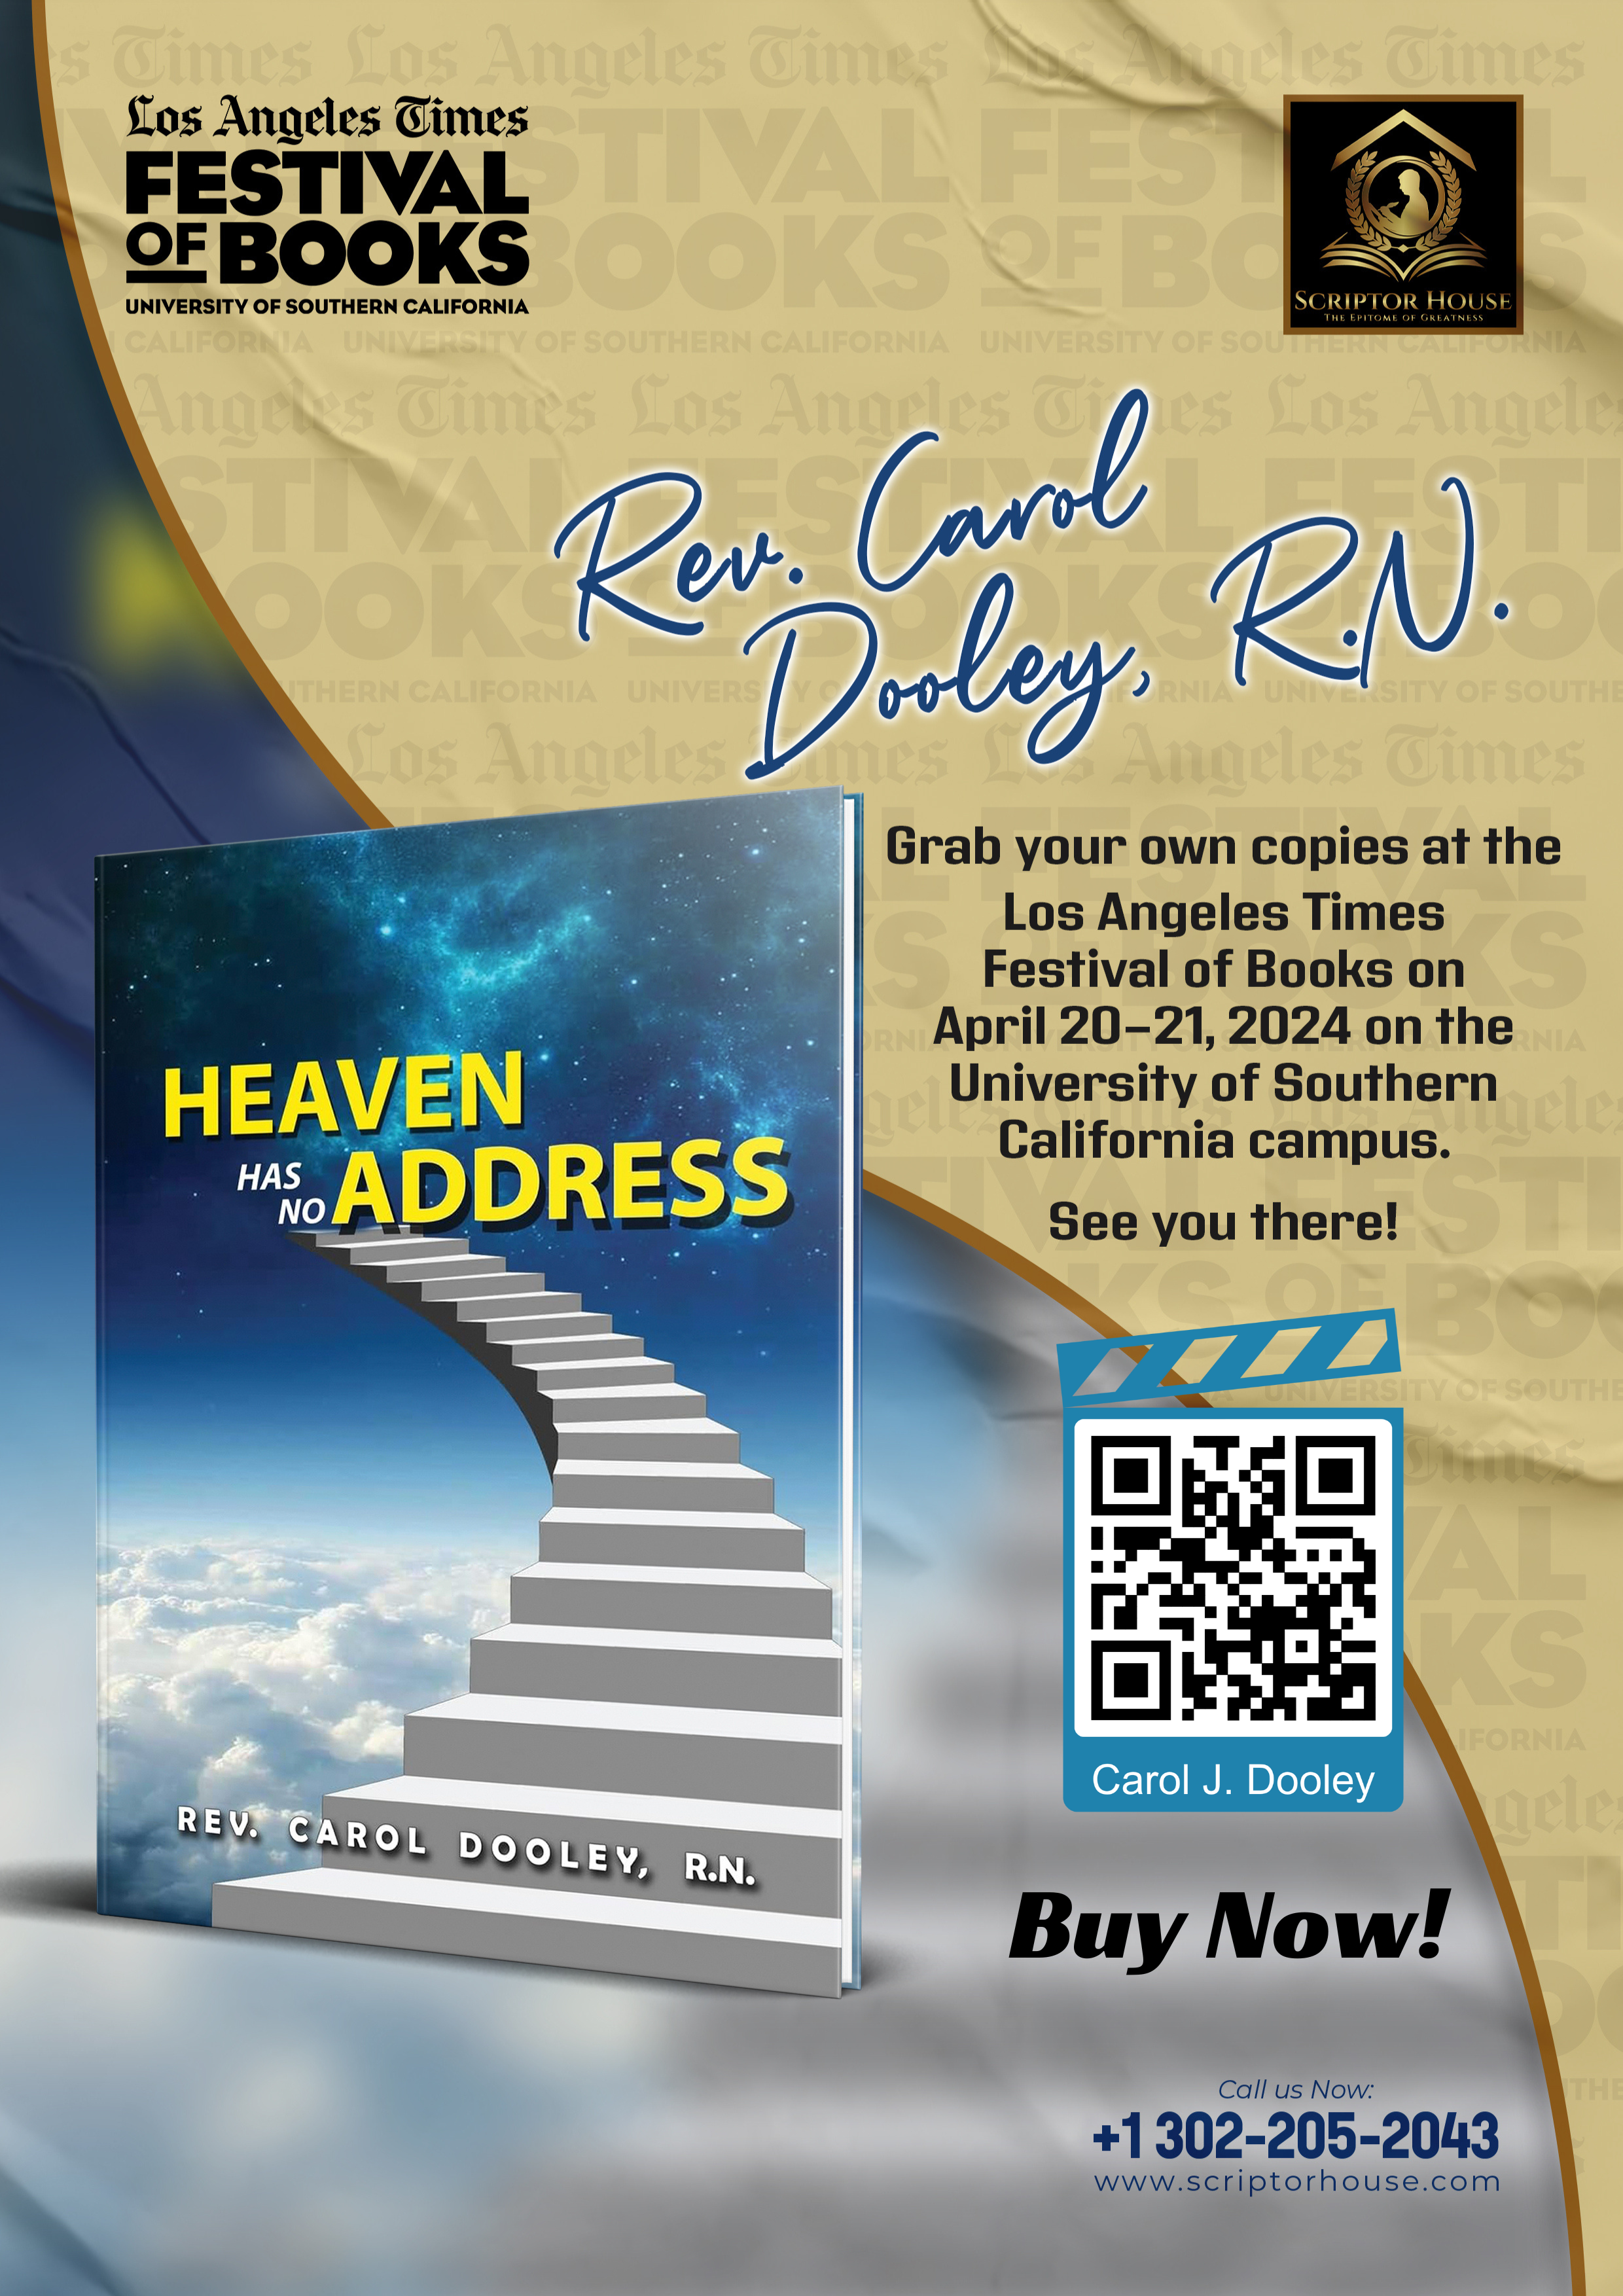 Rev. Carol Dooley Unveils Profound Insights into the Afterlife with Her Latest Book, "Heaven Has No Address"